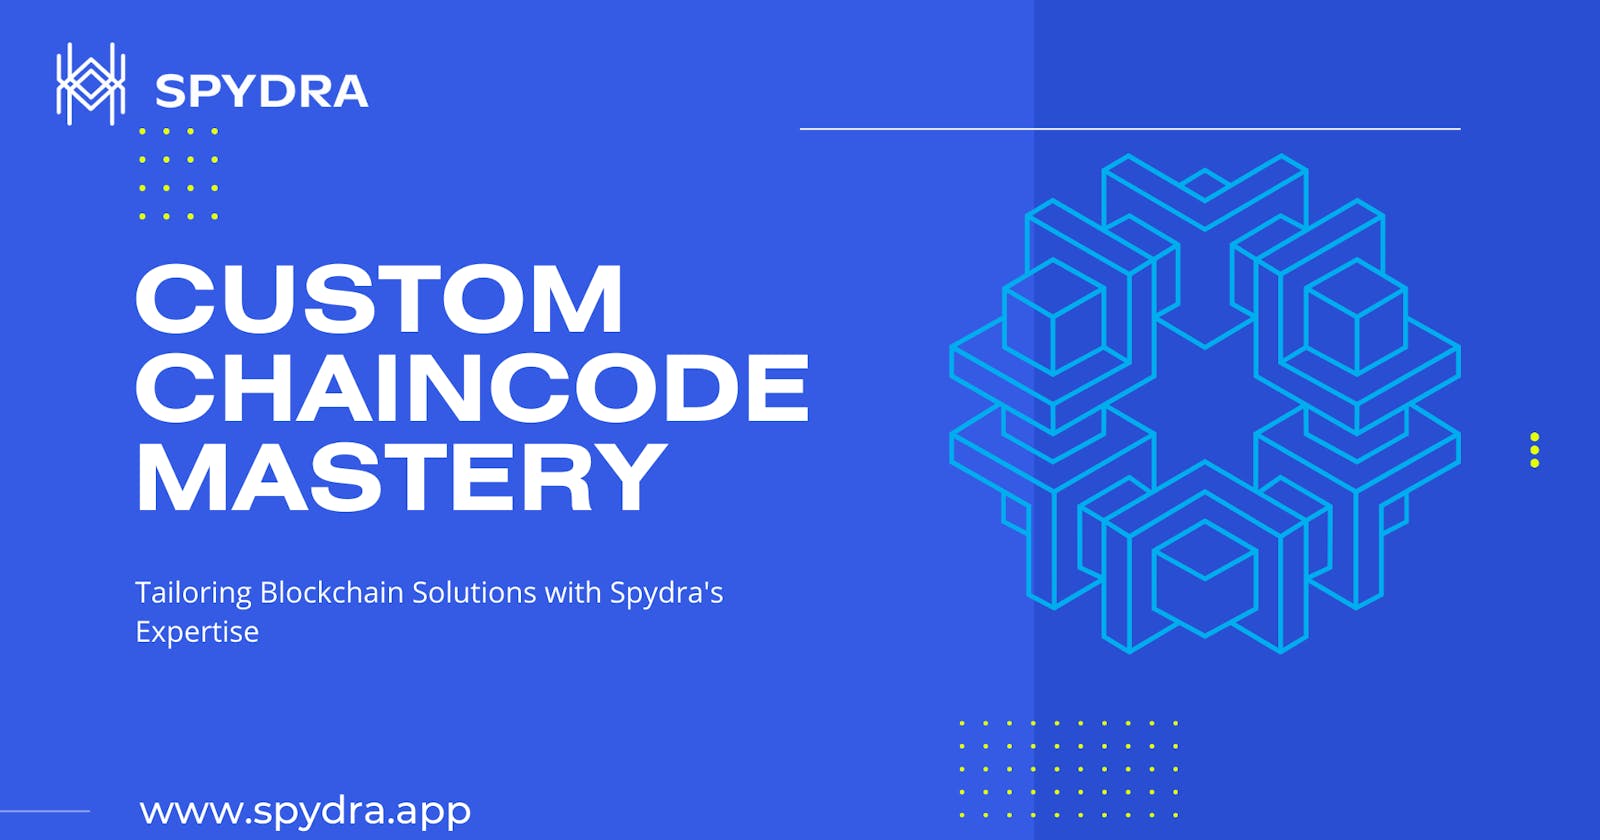 Custom Chaincode Mastery: Tailoring Blockchain Solutions with Spydra's Expertise